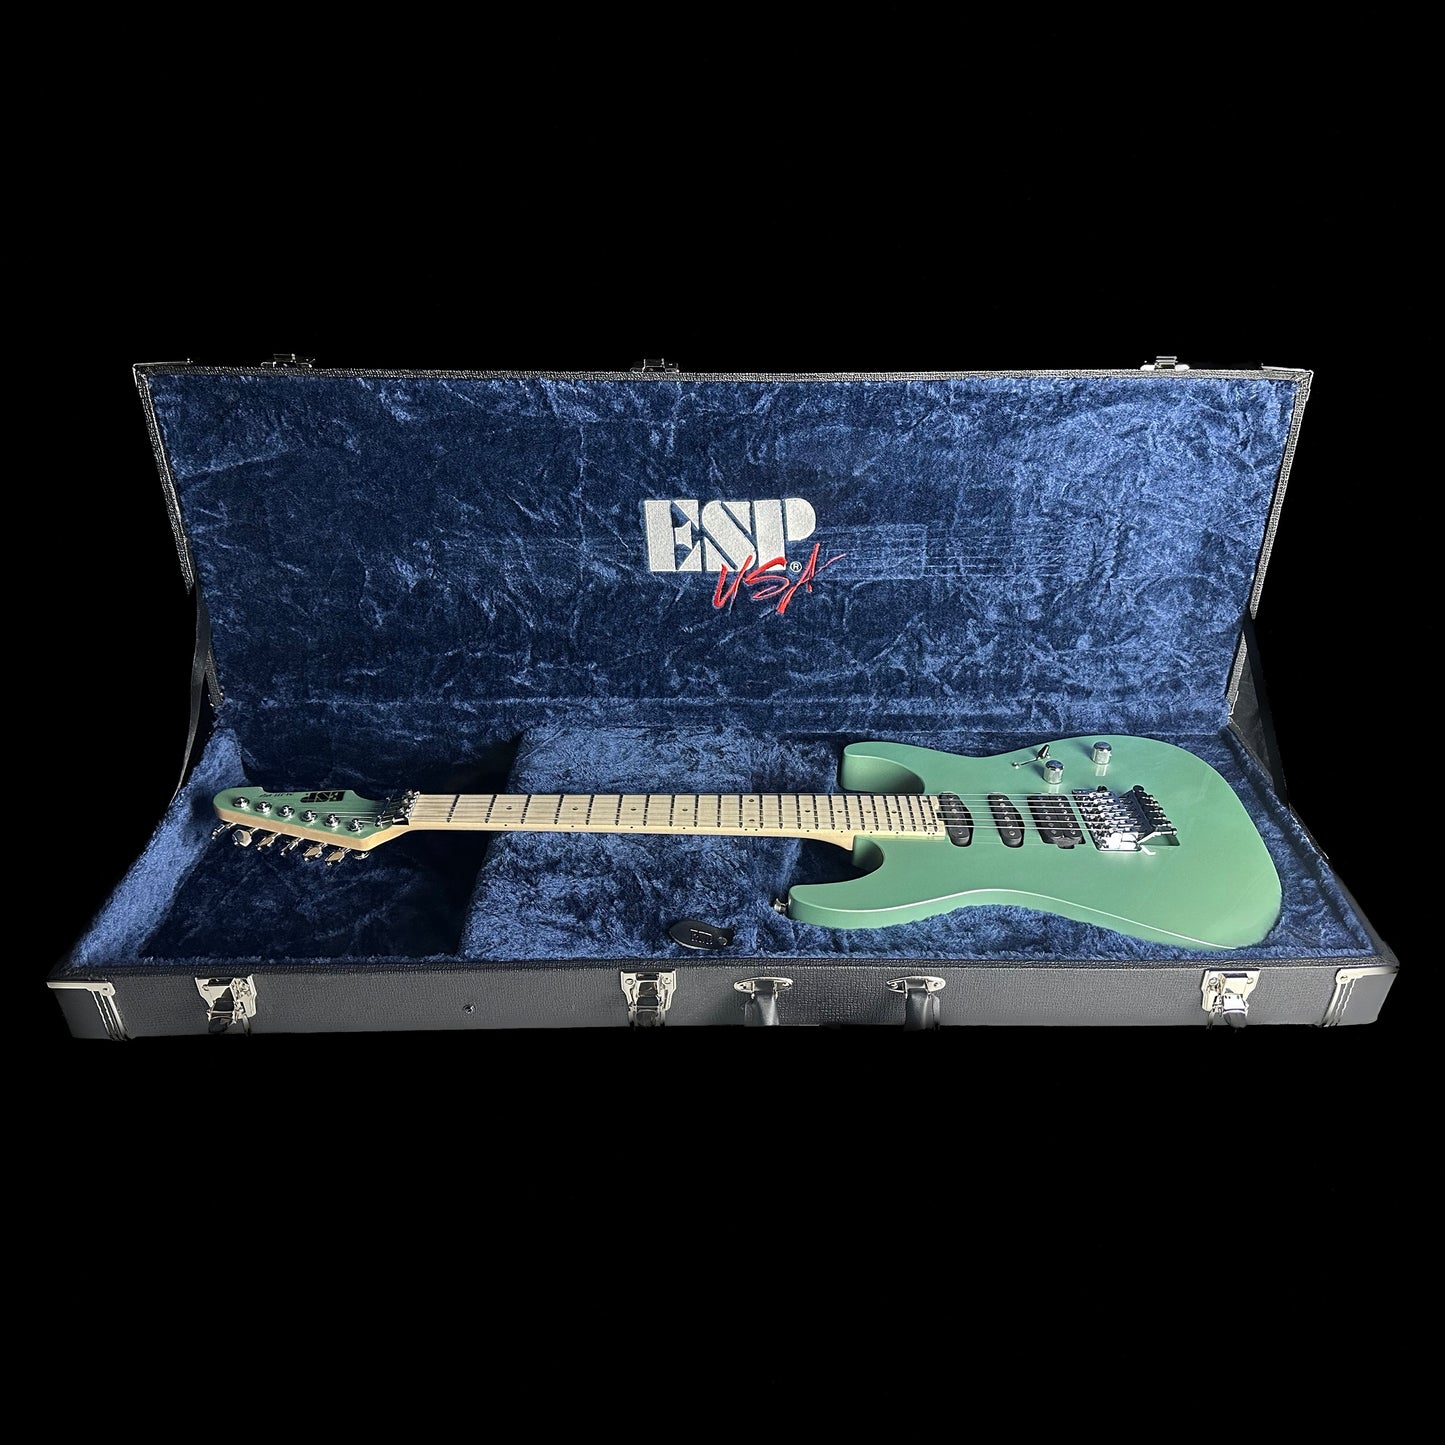 Left angle of ESP USA M-III Floyd Rose Oasis Green in case.